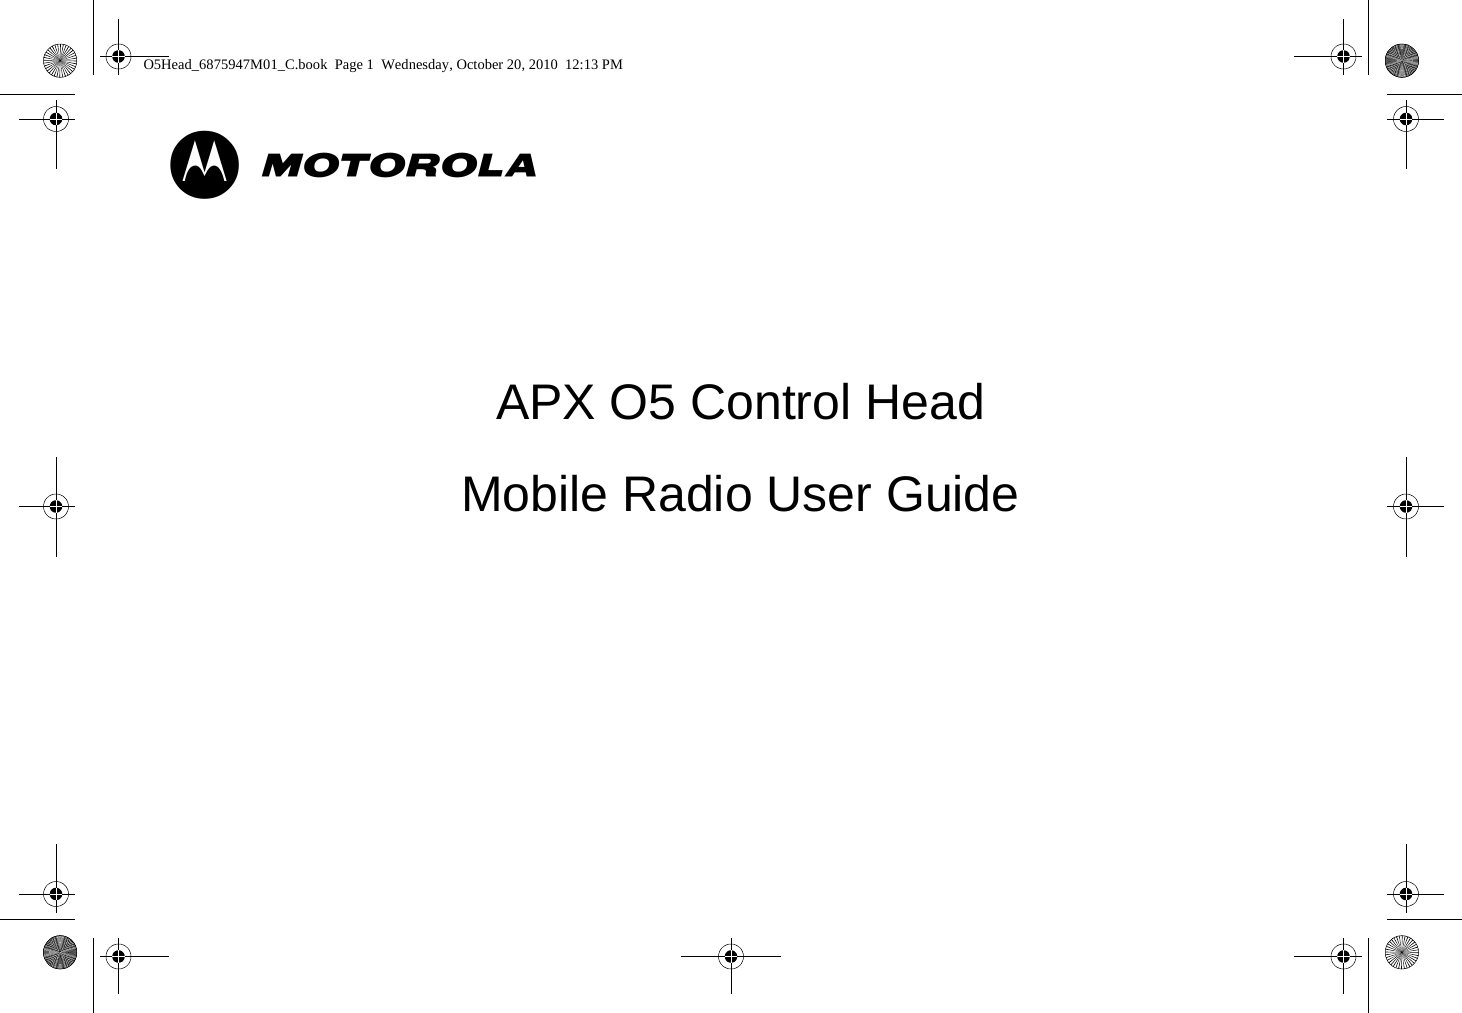 mAPX O5 Control HeadMobile Radio User GuideO5Head_6875947M01_C.book  Page 1  Wednesday, October 20, 2010  12:13 PM